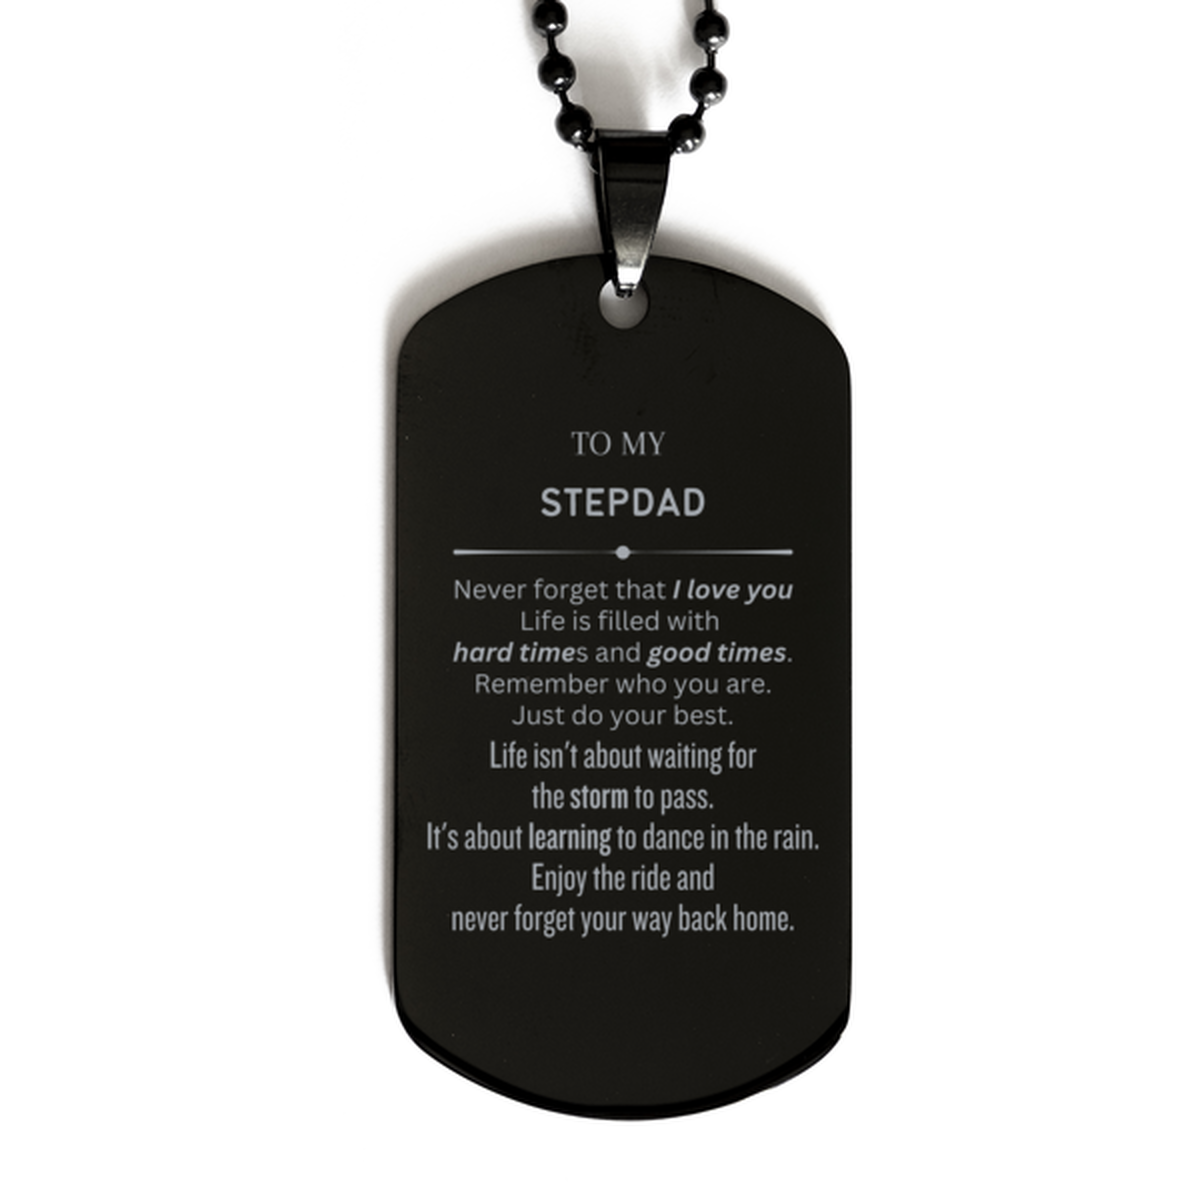 Christmas Stepdad Black Dog Tag Gifts, To My Stepdad Birthday Thank You Gifts For Stepdad, Graduation Unique Gifts For Stepdad To My Stepdad Never forget that I love you life is filled with hard times and good times. Remember who you are. Just do your bes